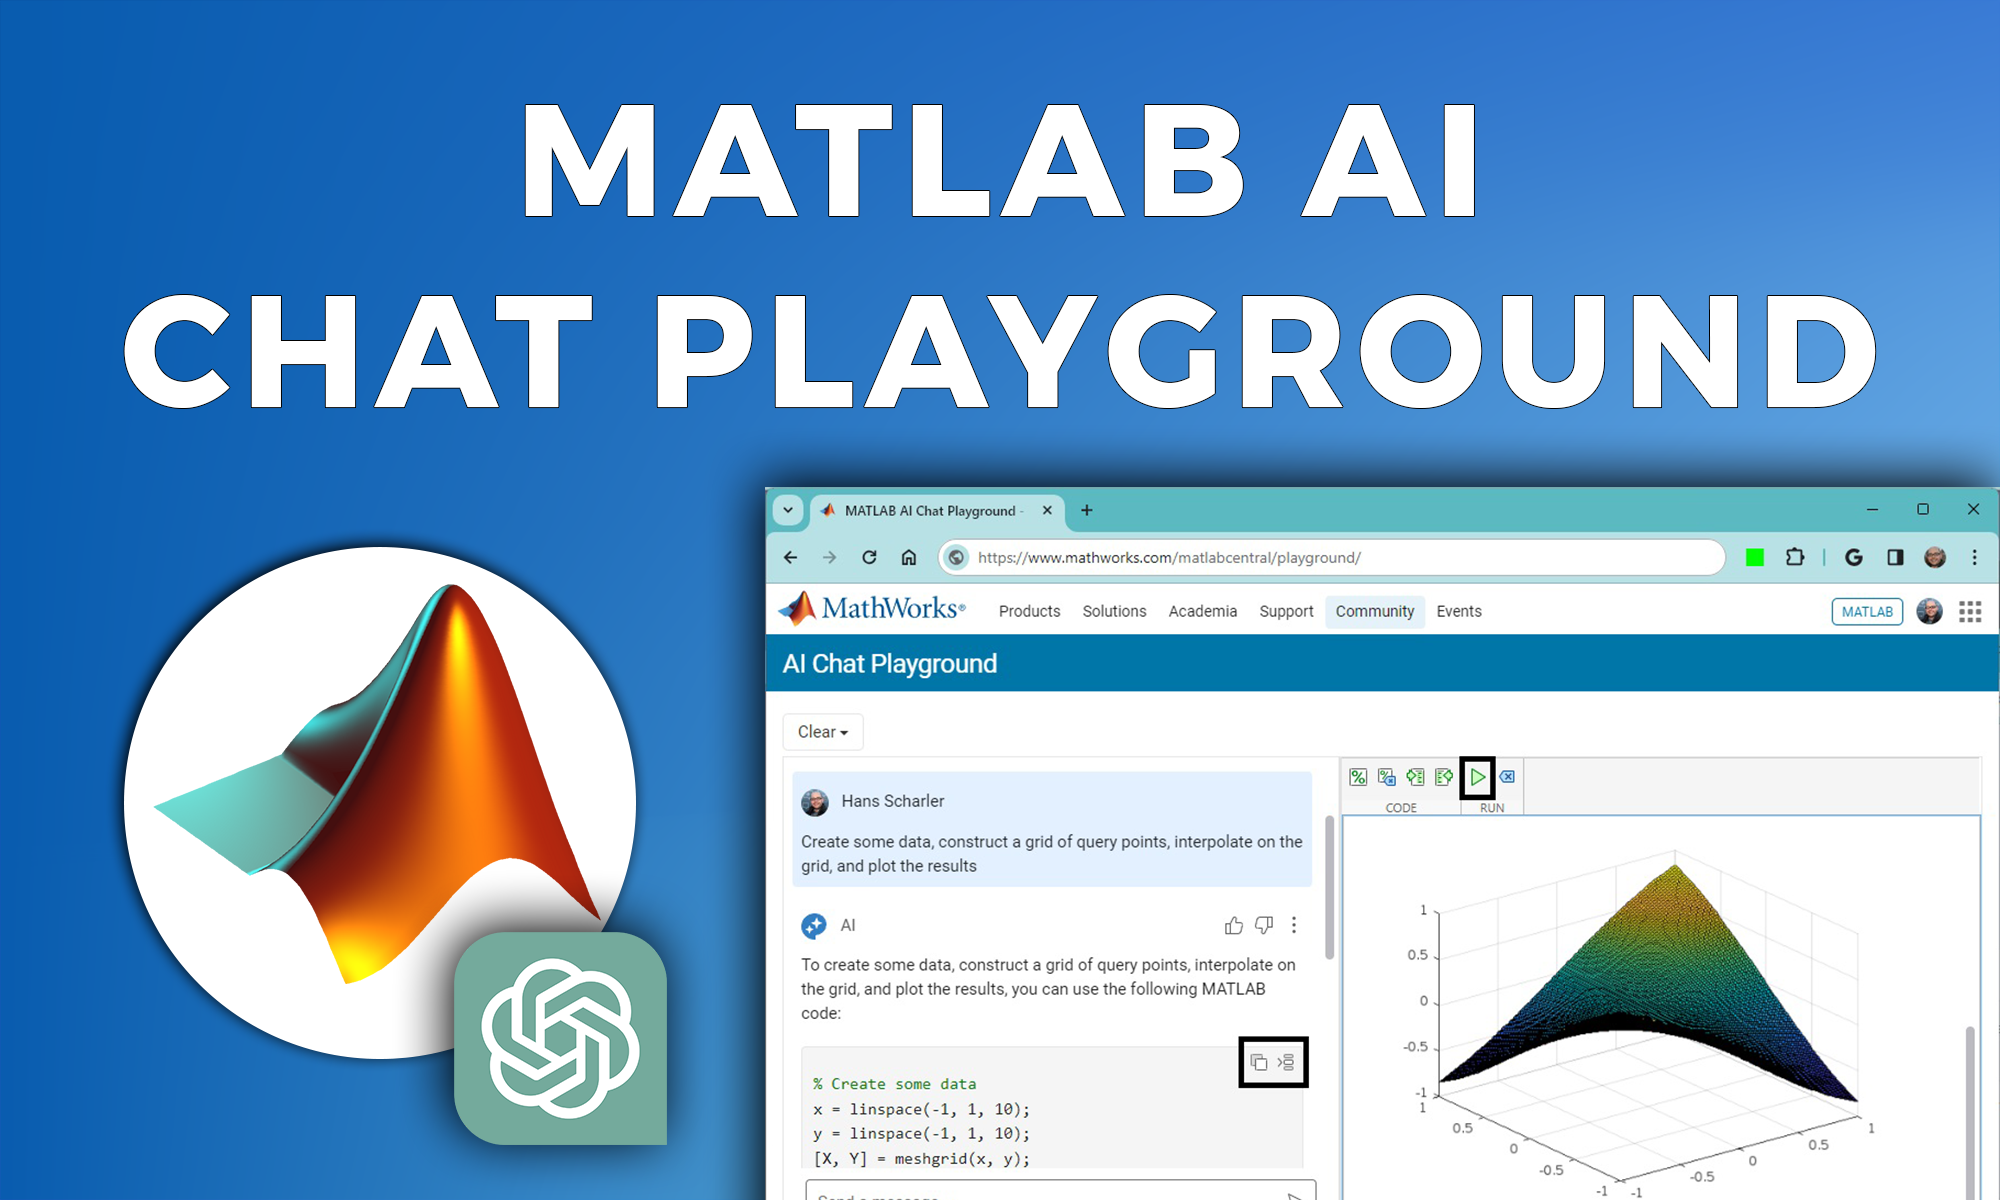 Introducing the MATLAB AI Chat Playground: The Power of Generative AI